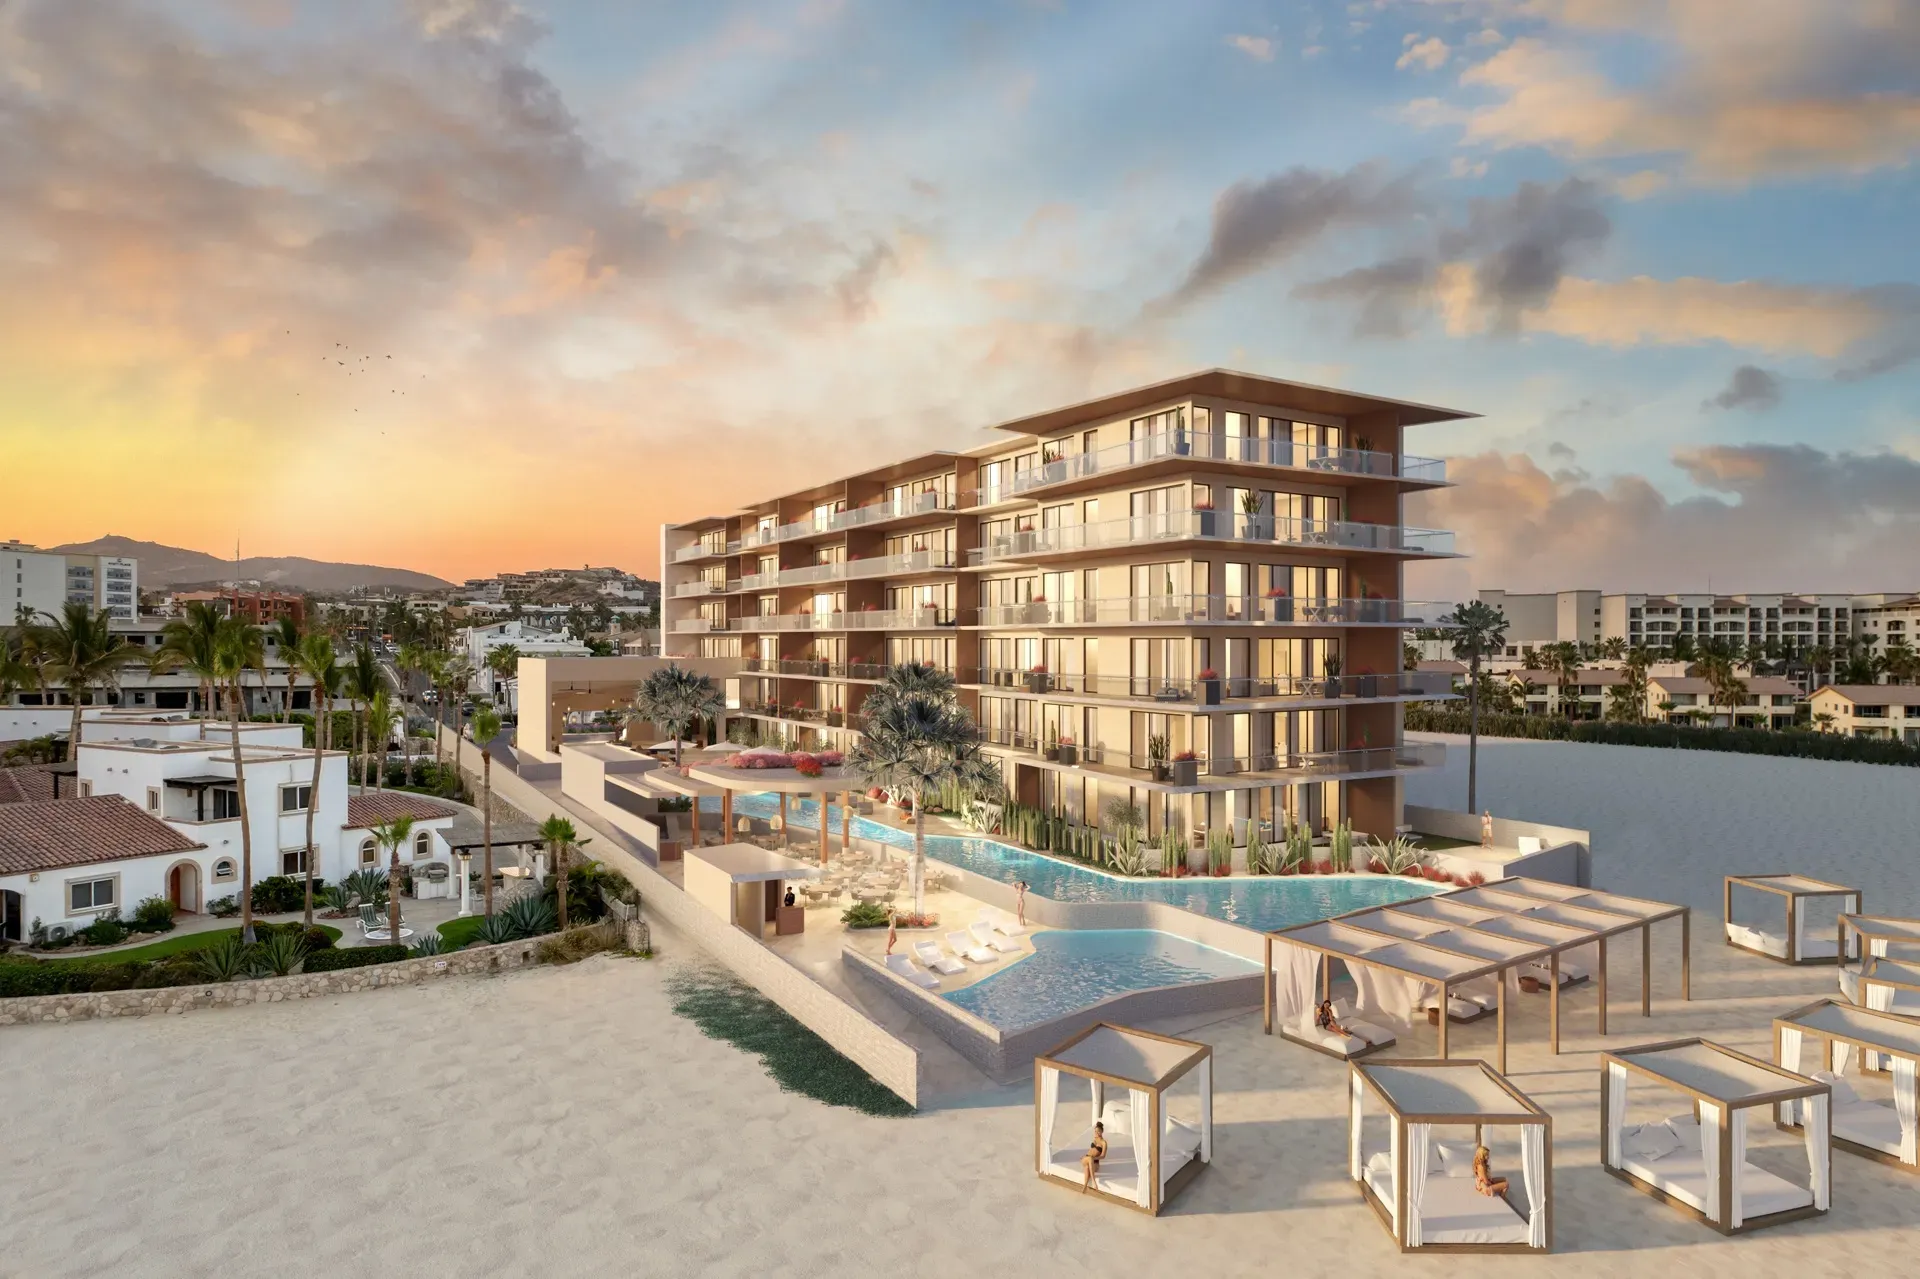 This boutique development includes 33 residential units, an exclusive lobby bar, a beach club, and a wellness spa. Serenity terraces offer so much more to relax & enjoy the breathtaking ocean views that will ensure you have found your home at Albaluz.